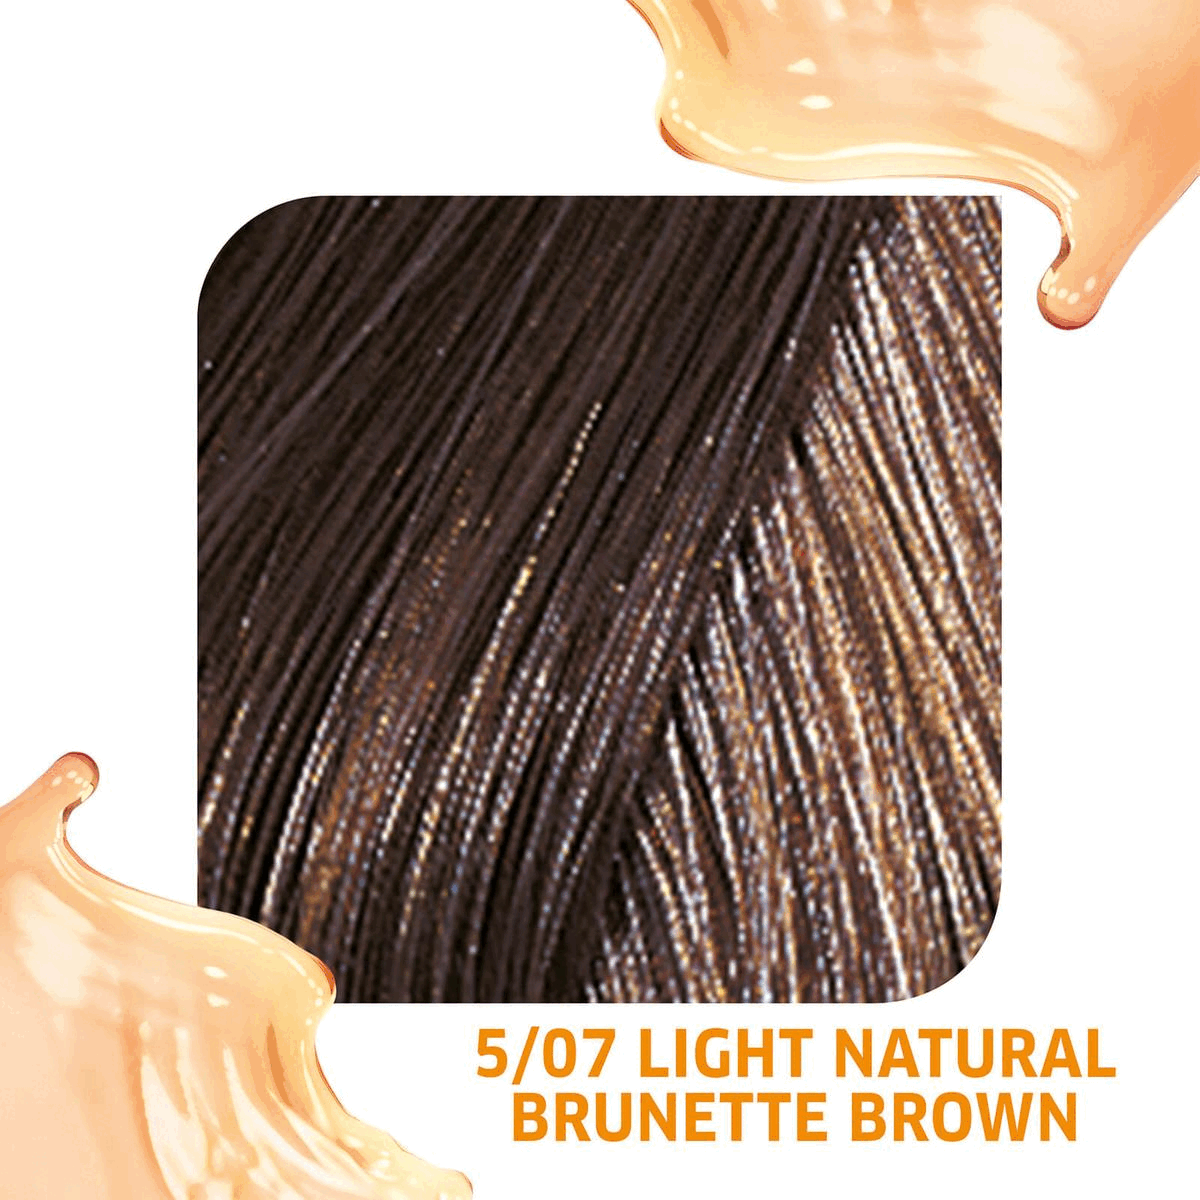  5/07 Light Brown Natural Brow Semi-Permenant Colour enhance.5/07 Light Brown Natural Brow Semi-Permenant Colour enhance.5/07 Light Brown Natural Brow Semi-Permenant Colour enhance.Direct Dies and Vitamin Care Complex.Lasts Up to 10 Shampoos.Colour, depth and tone.Quick and Easy Application